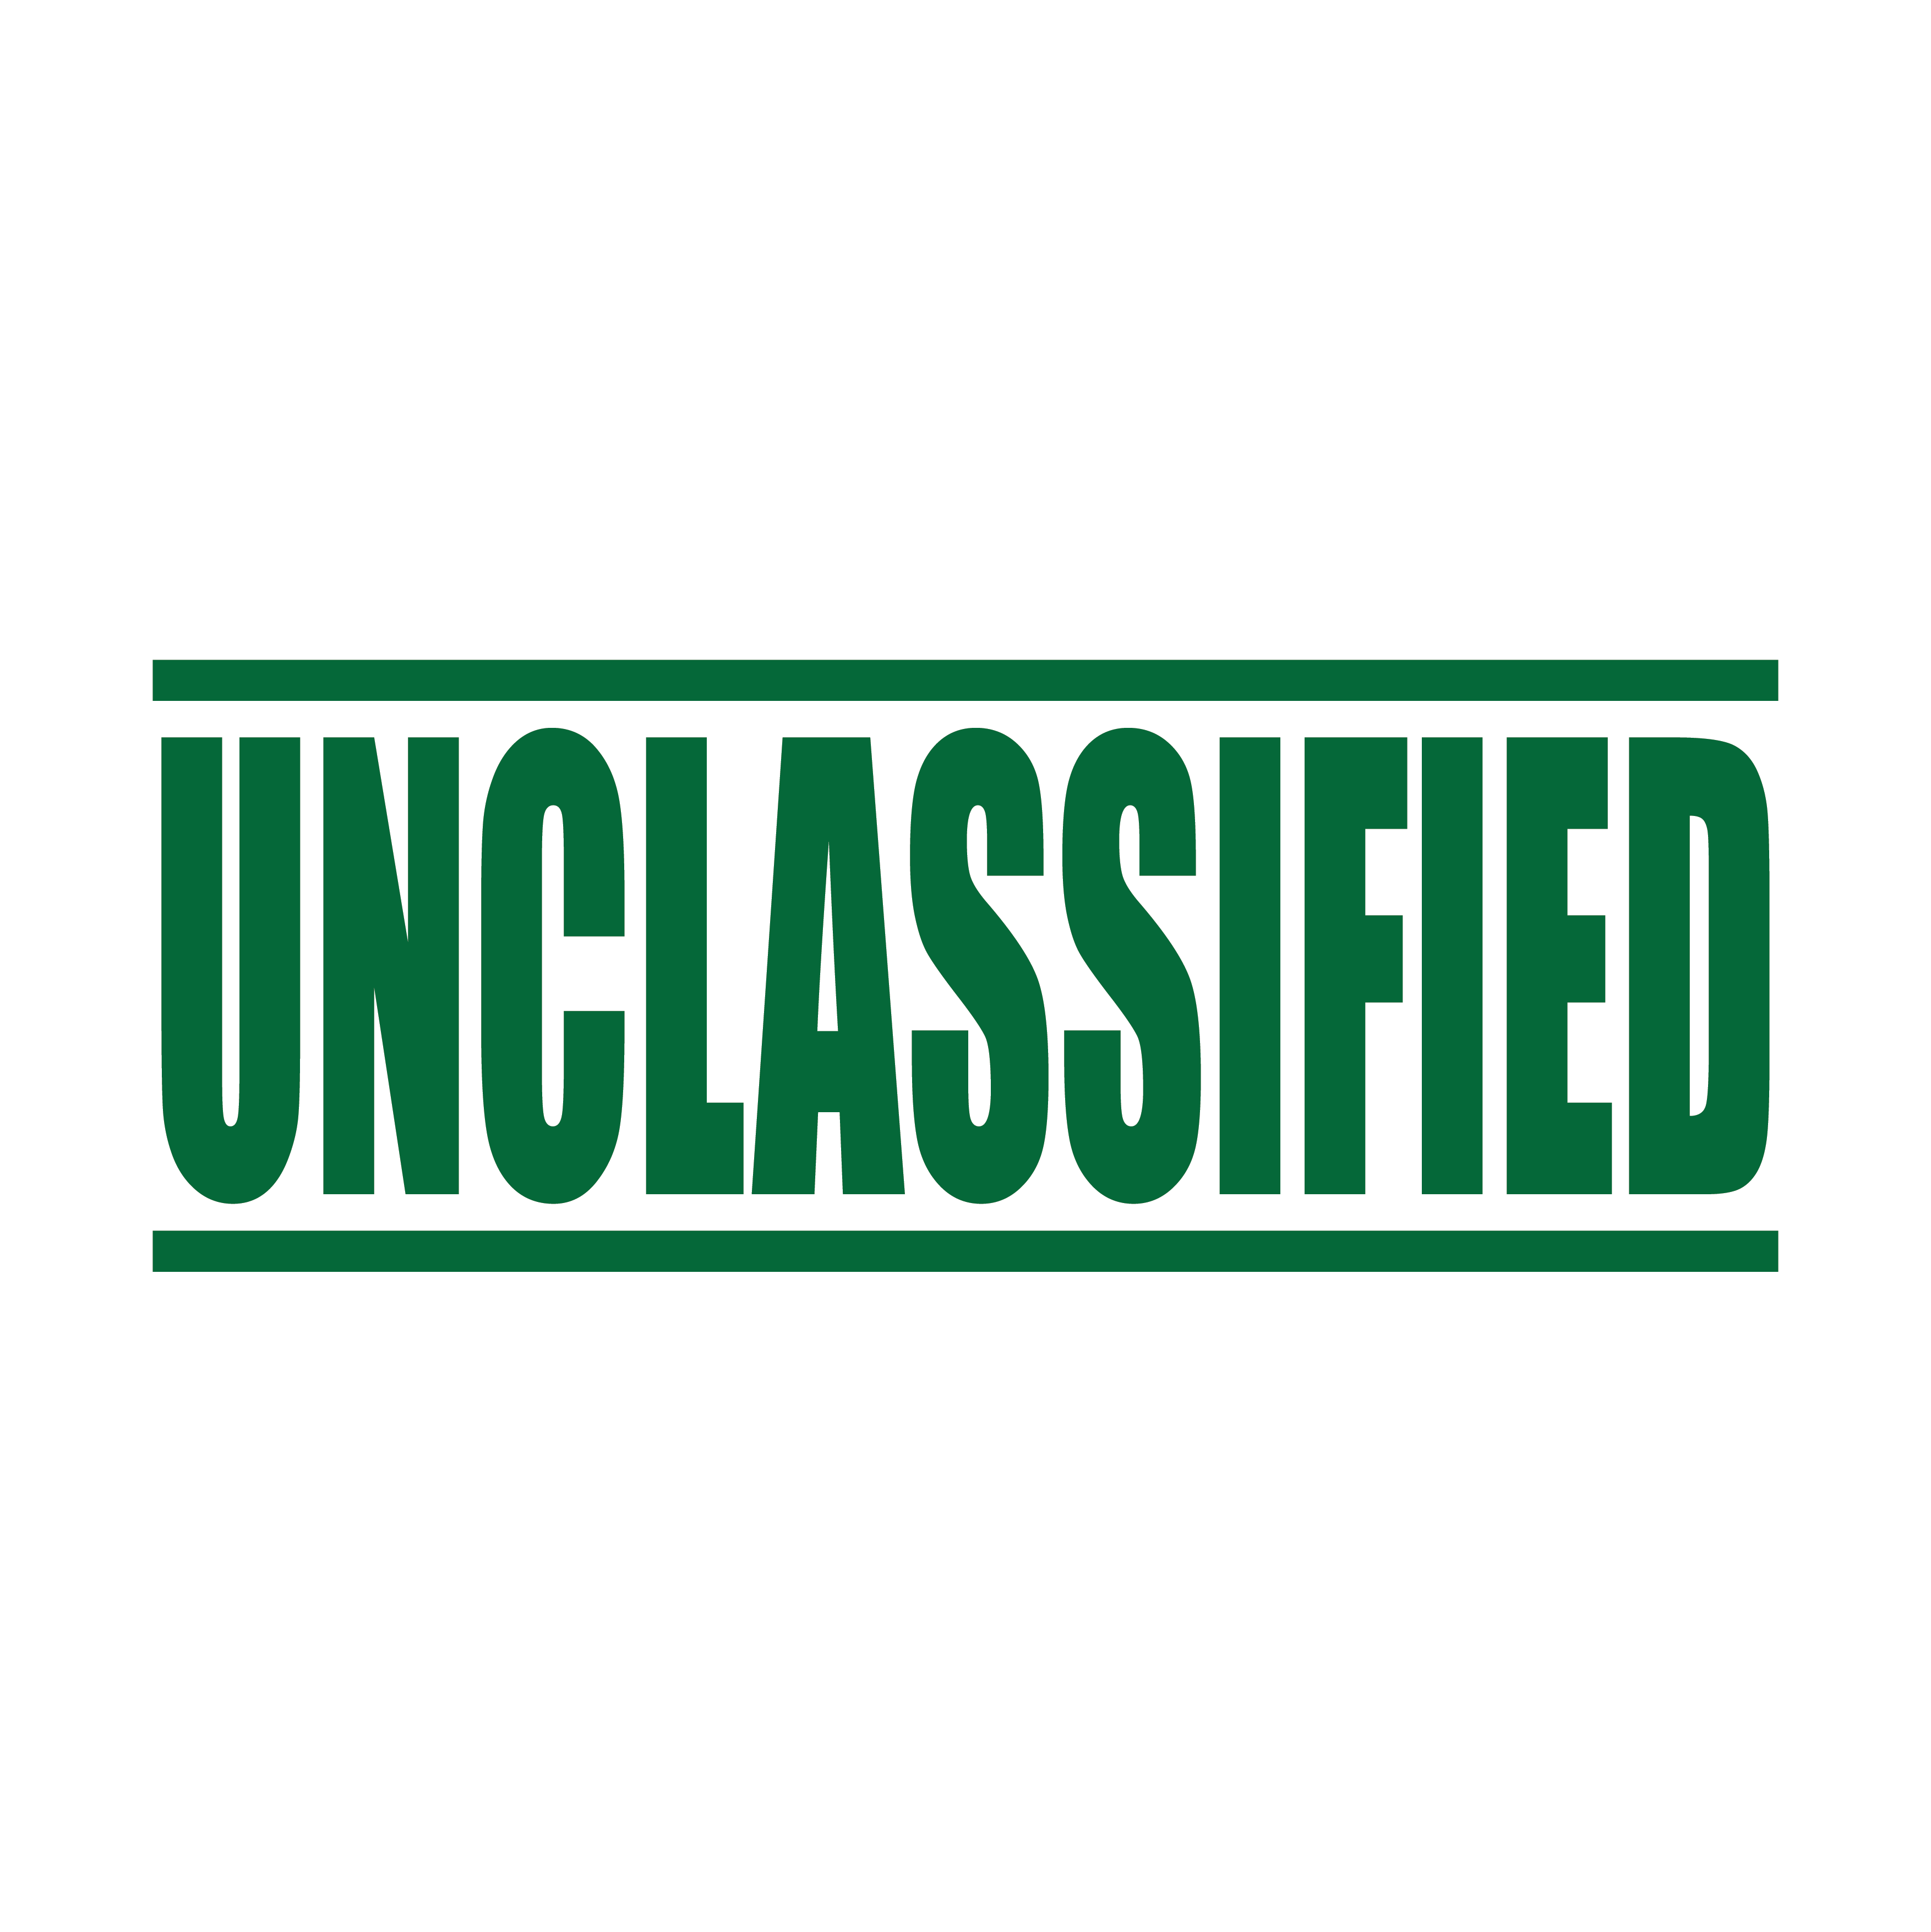 Green Unclassified Stamp